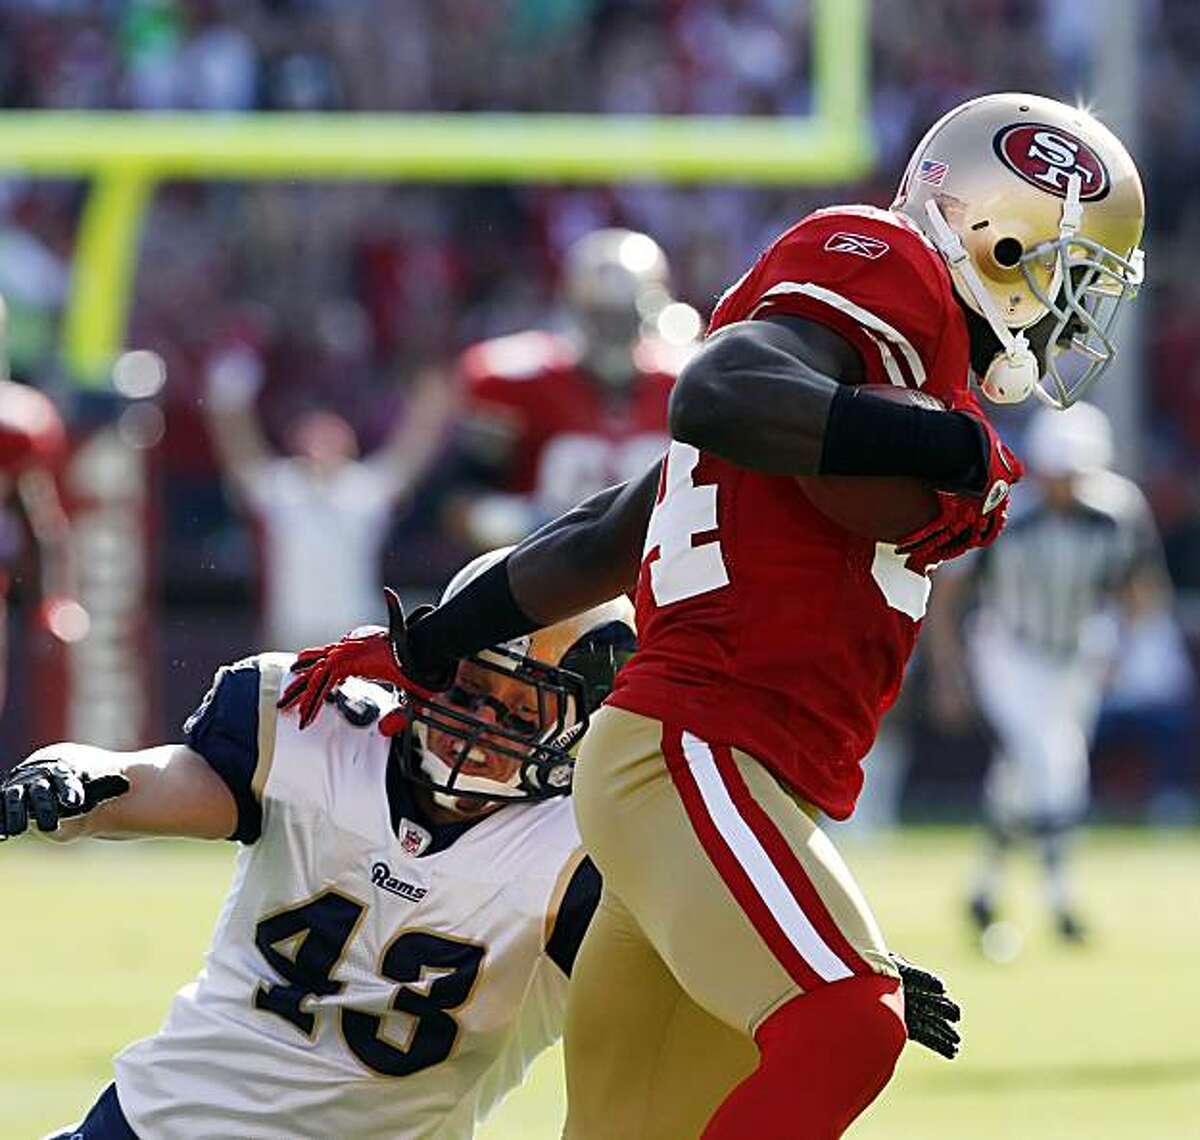 Josh Morgan breaks a tackle by the Rams' Craig Dahl on his 65-yard catch and run in the first quarter at Candlestick Park in San Francisco on Sunday.